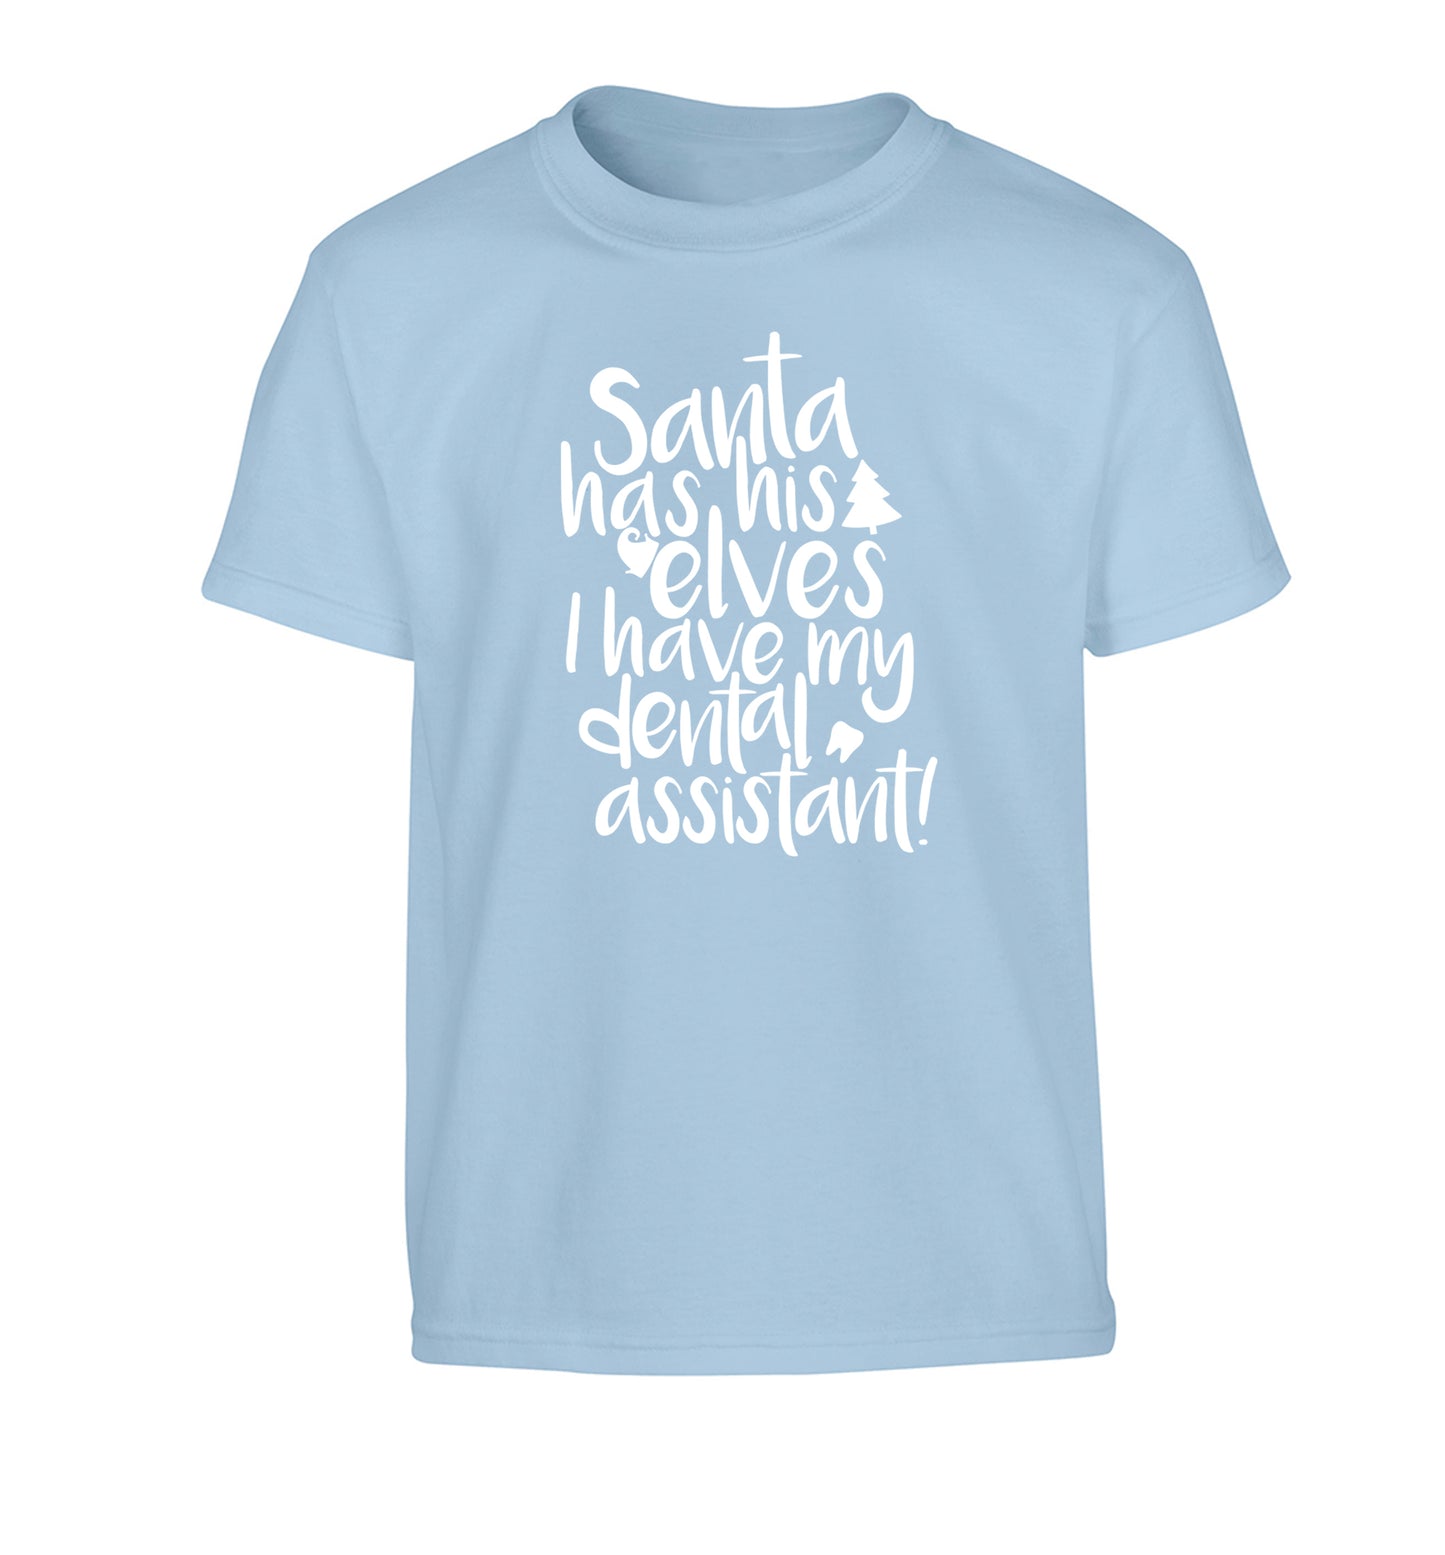 Santa has his elves I have my dental assistant Children's light blue Tshirt 12-14 Years